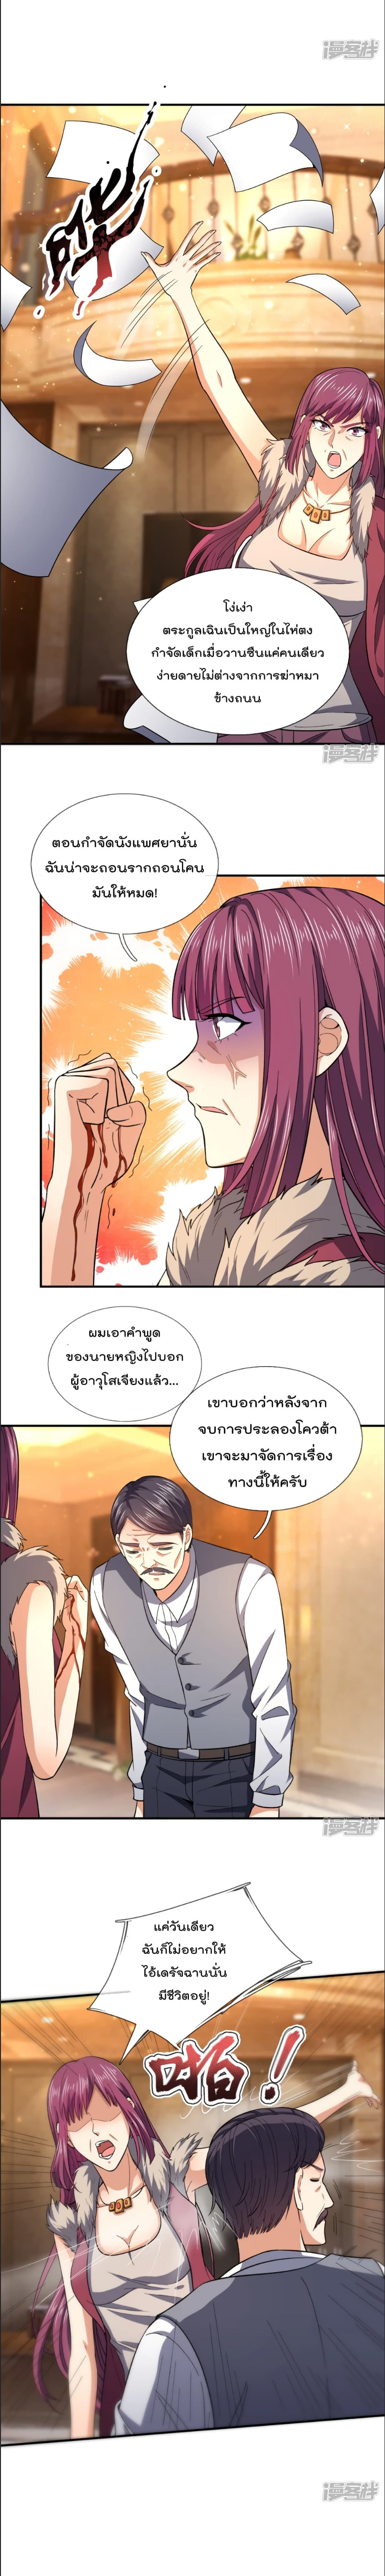 The Legend God of War in The City 113 (2)